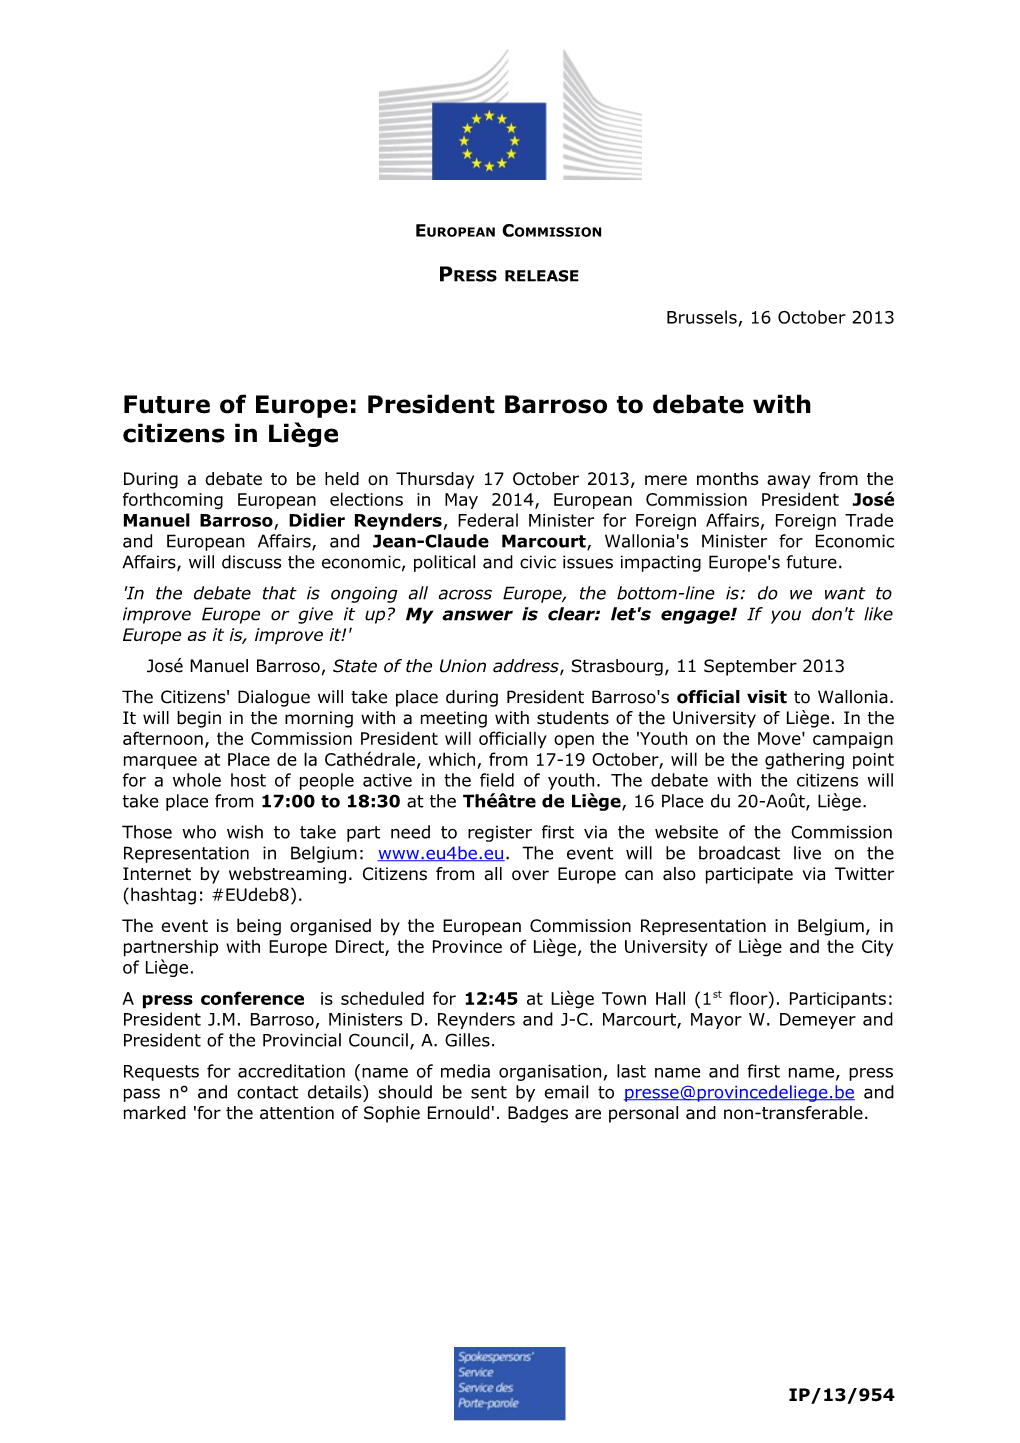 Future of Europe: President Barroso to Debate with Citizens in Liège